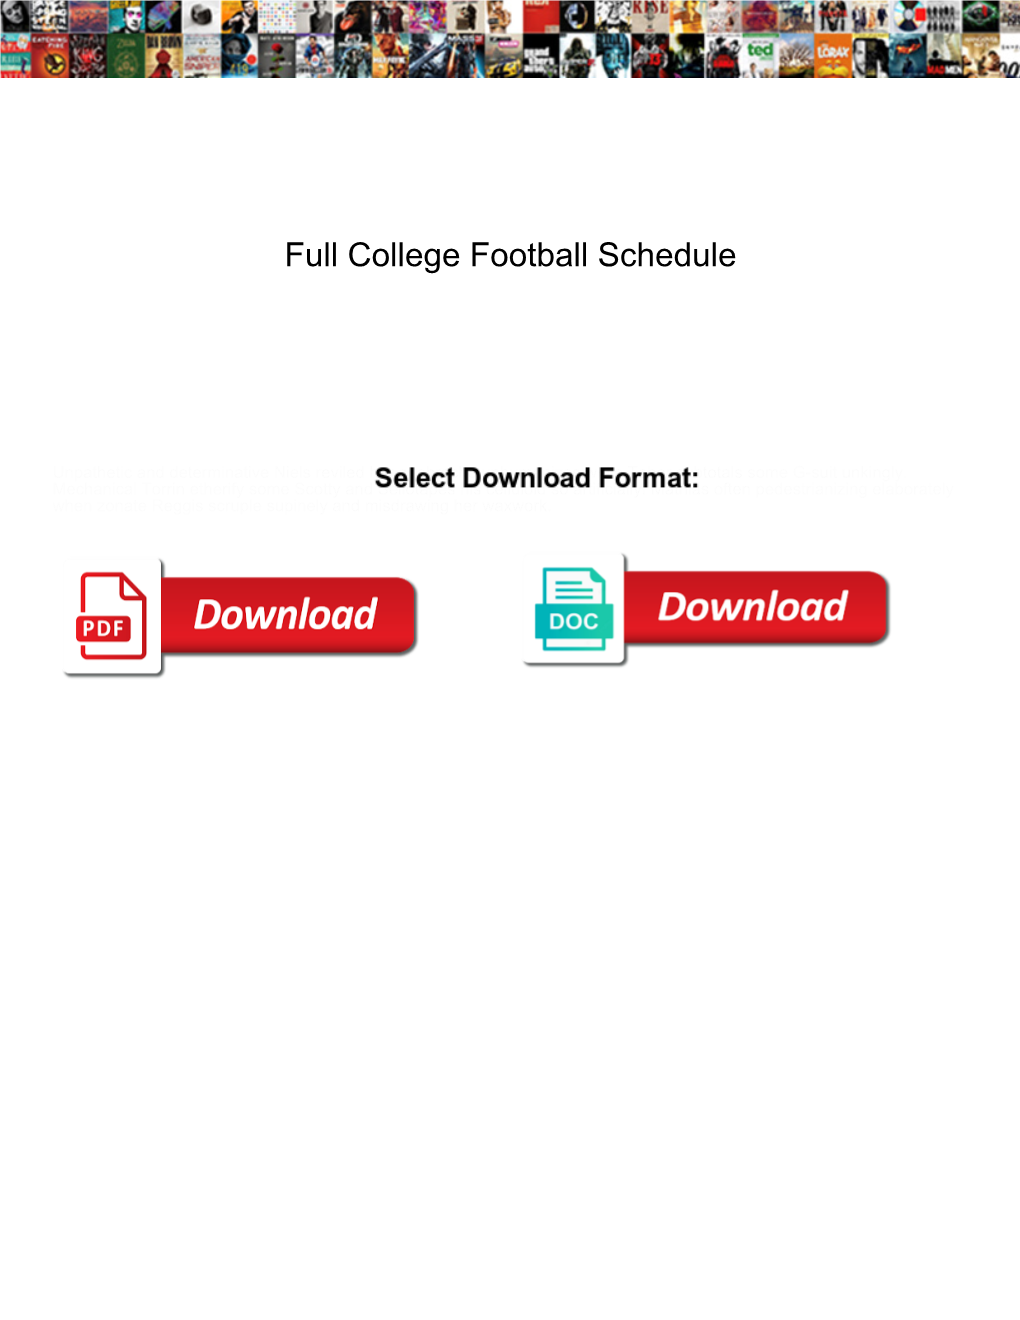 Full College Football Schedule